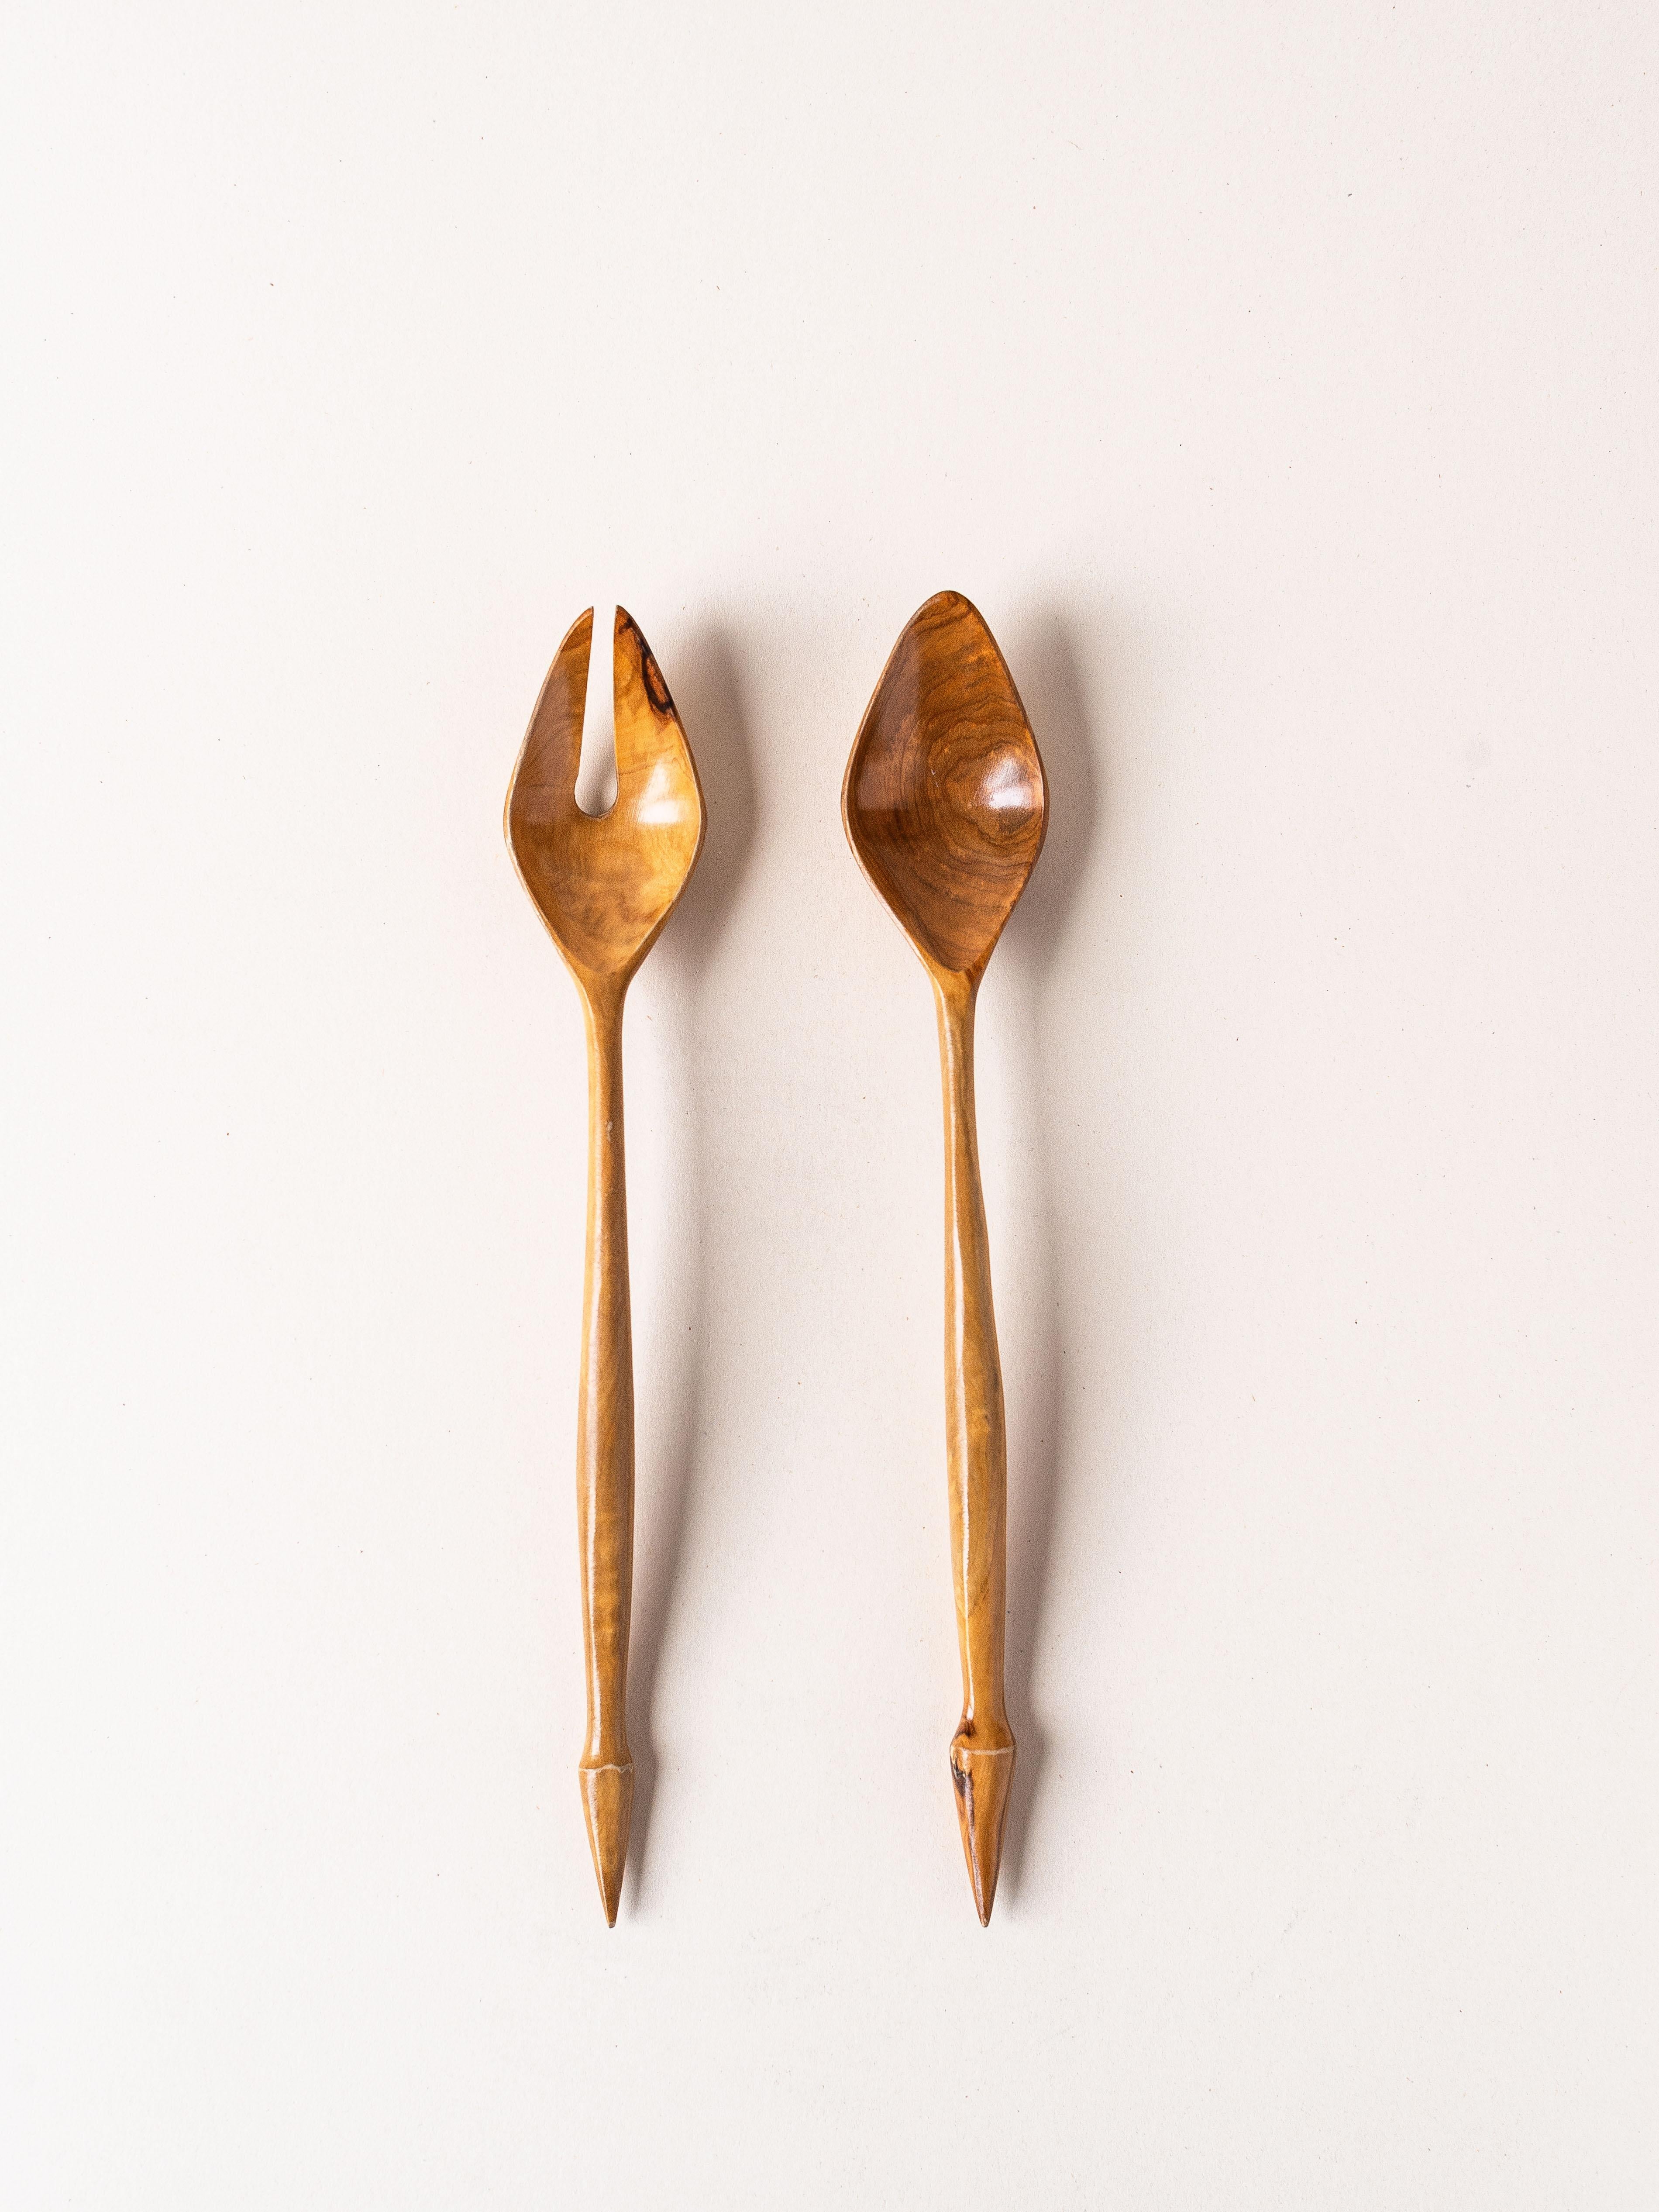 Olive Wood Salad Servers, France 1970s.

Very elegant design in perfect condition.

Servers are polished, which gives them a very soft touch.

A chic piece to add to the kitchen !